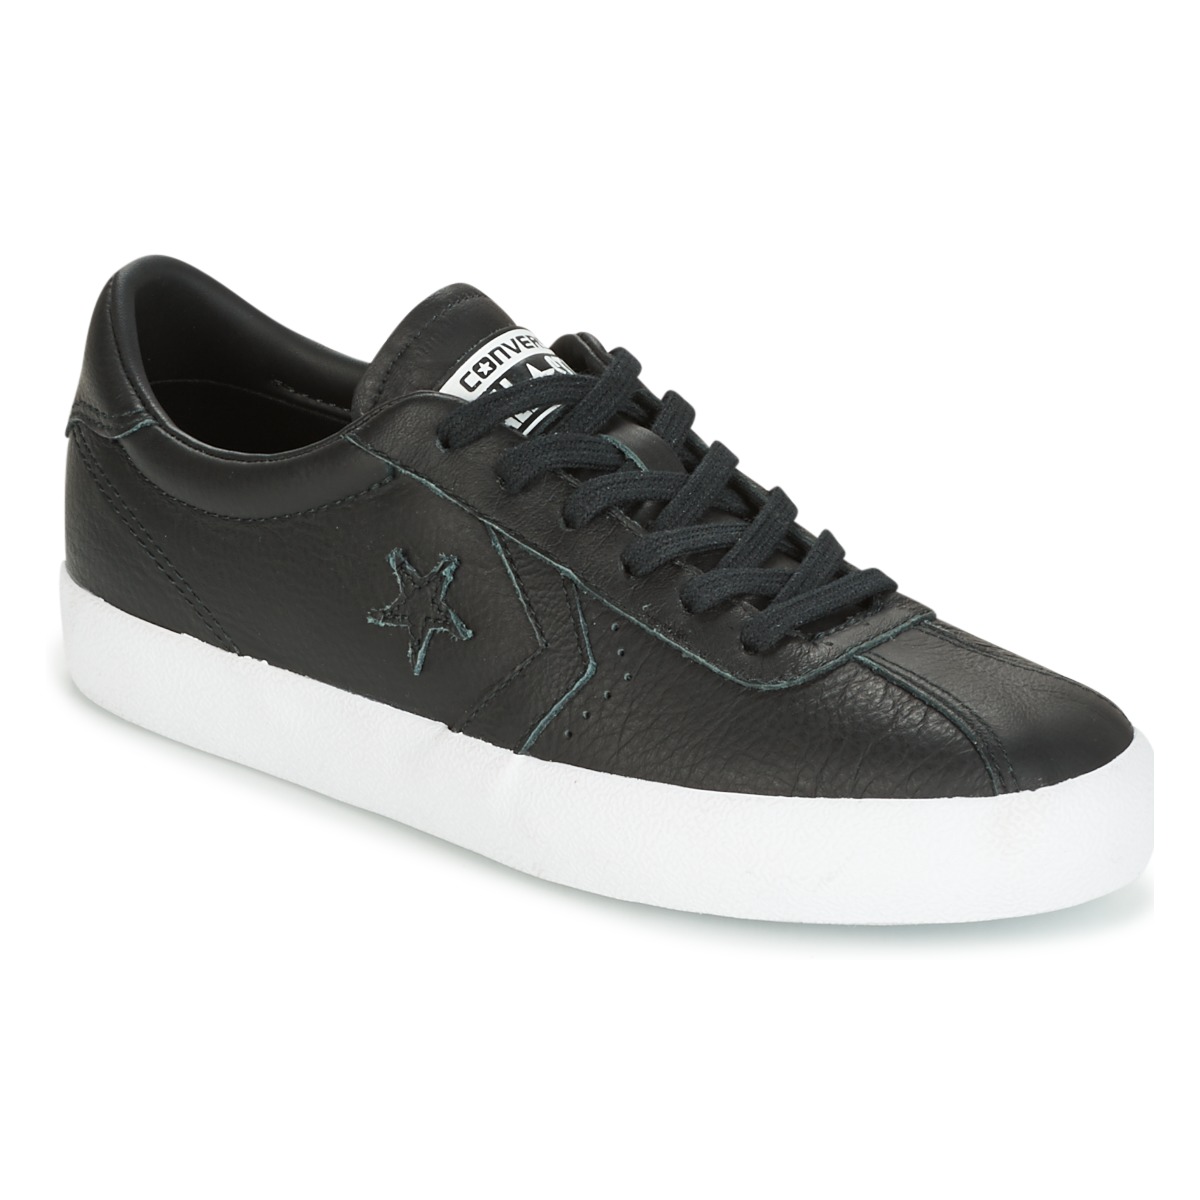 Chaussures de Fitness Mixte ConverseConverse Lifestyle Breakpoint Ox Suede Marque  